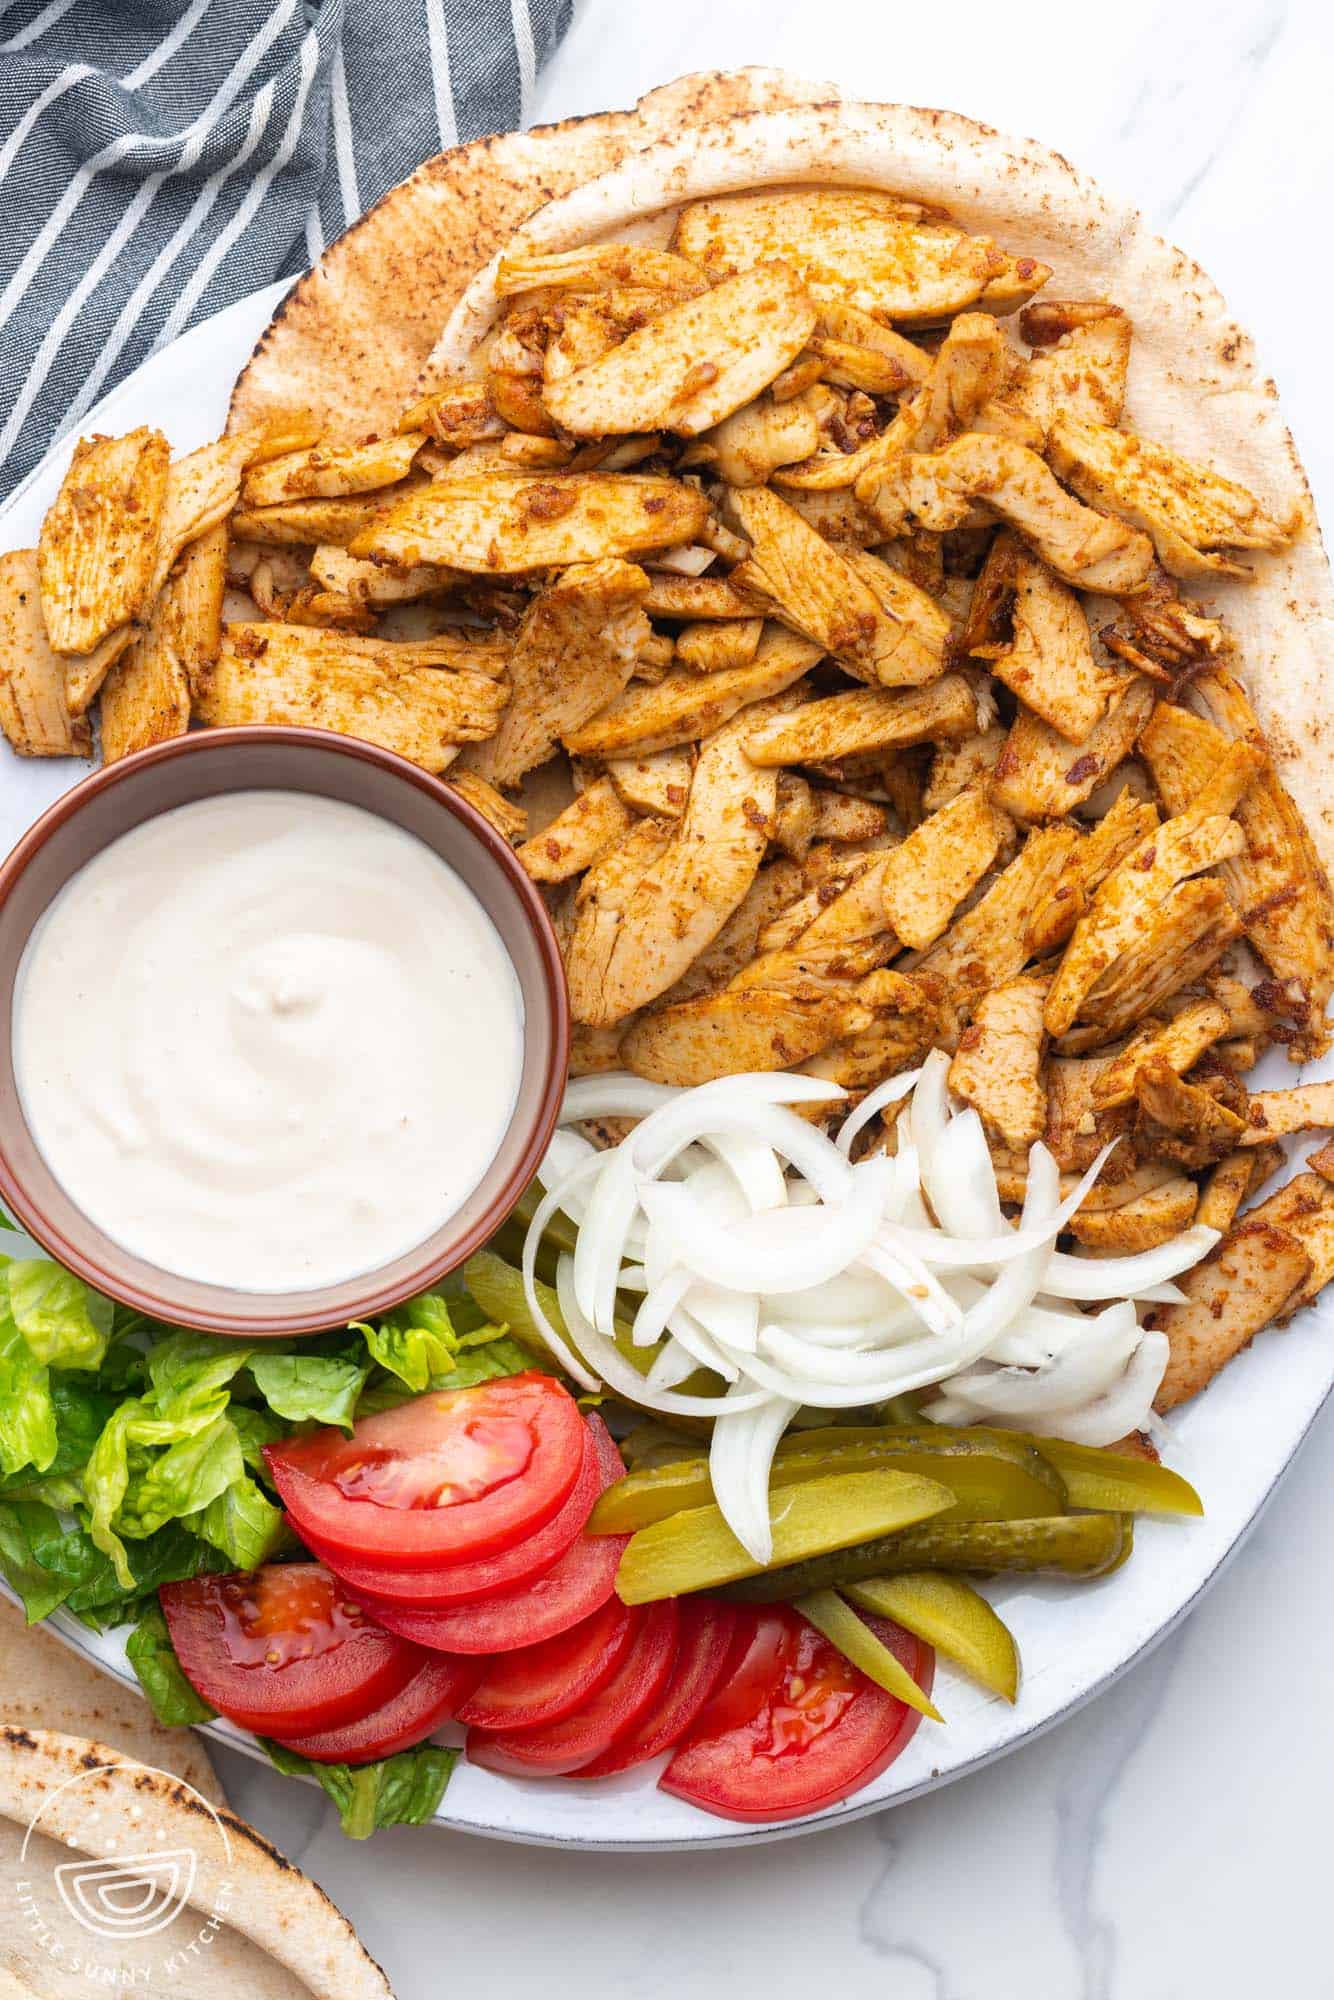 a platter of sliced chicken shawarma with creamy sauce, sliced tomatoes and onions, pickles, and shredded lettuce on the side.